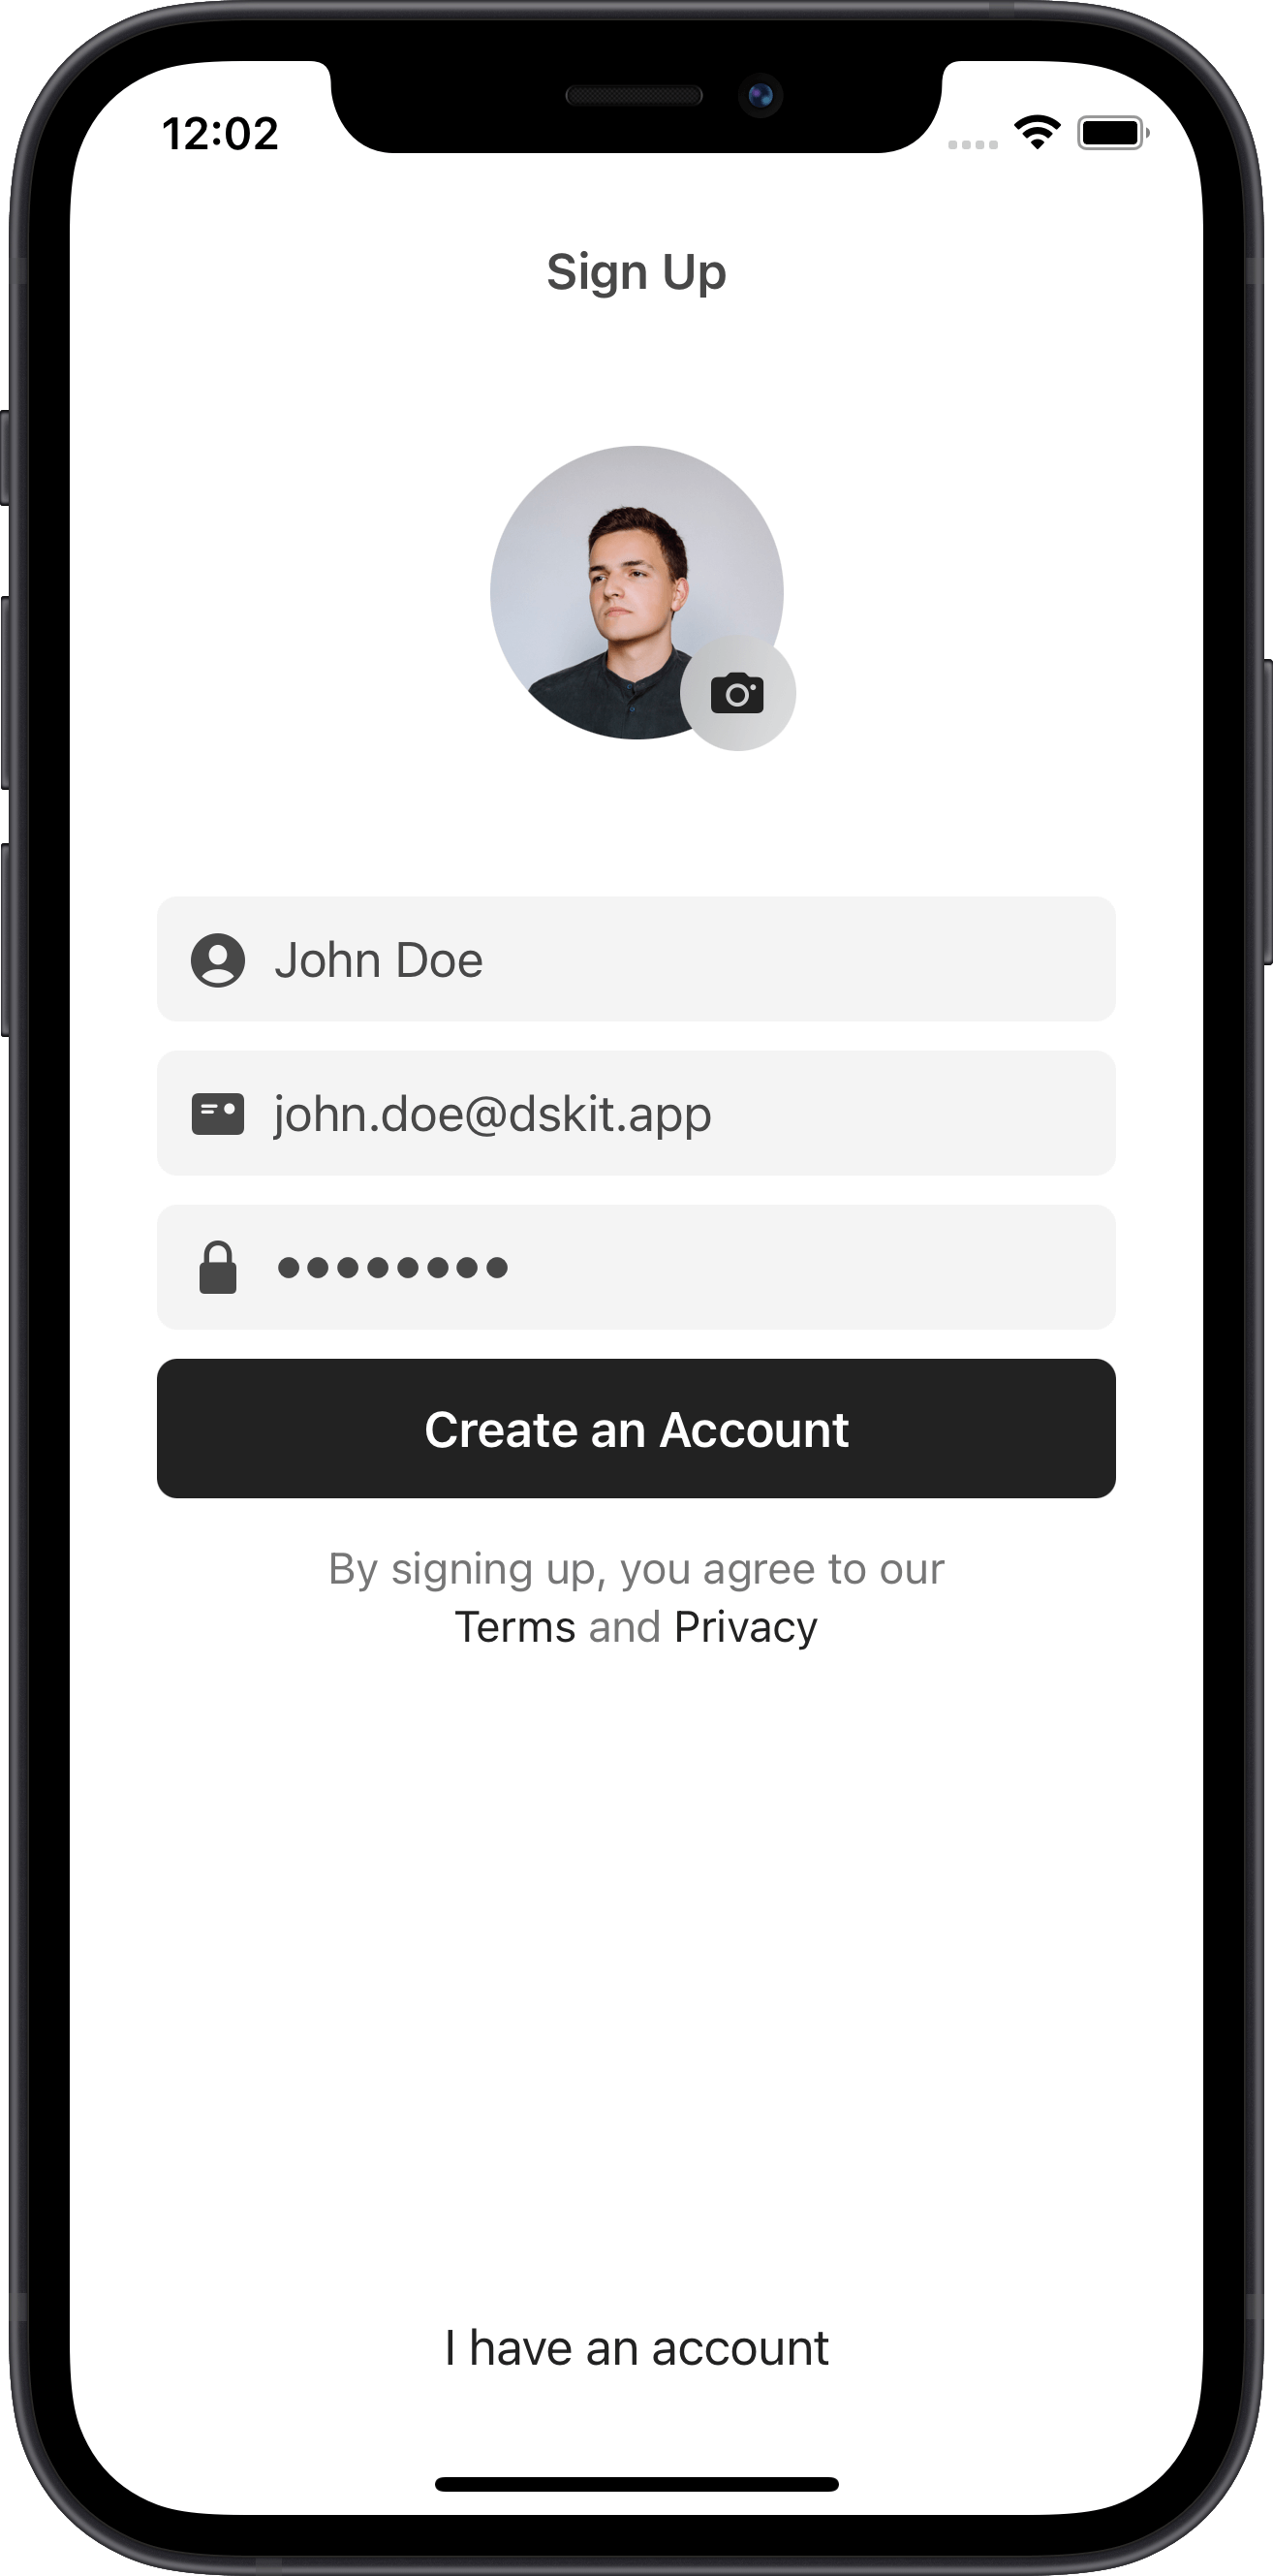 ios ecommerce app form, user name, email, password, design